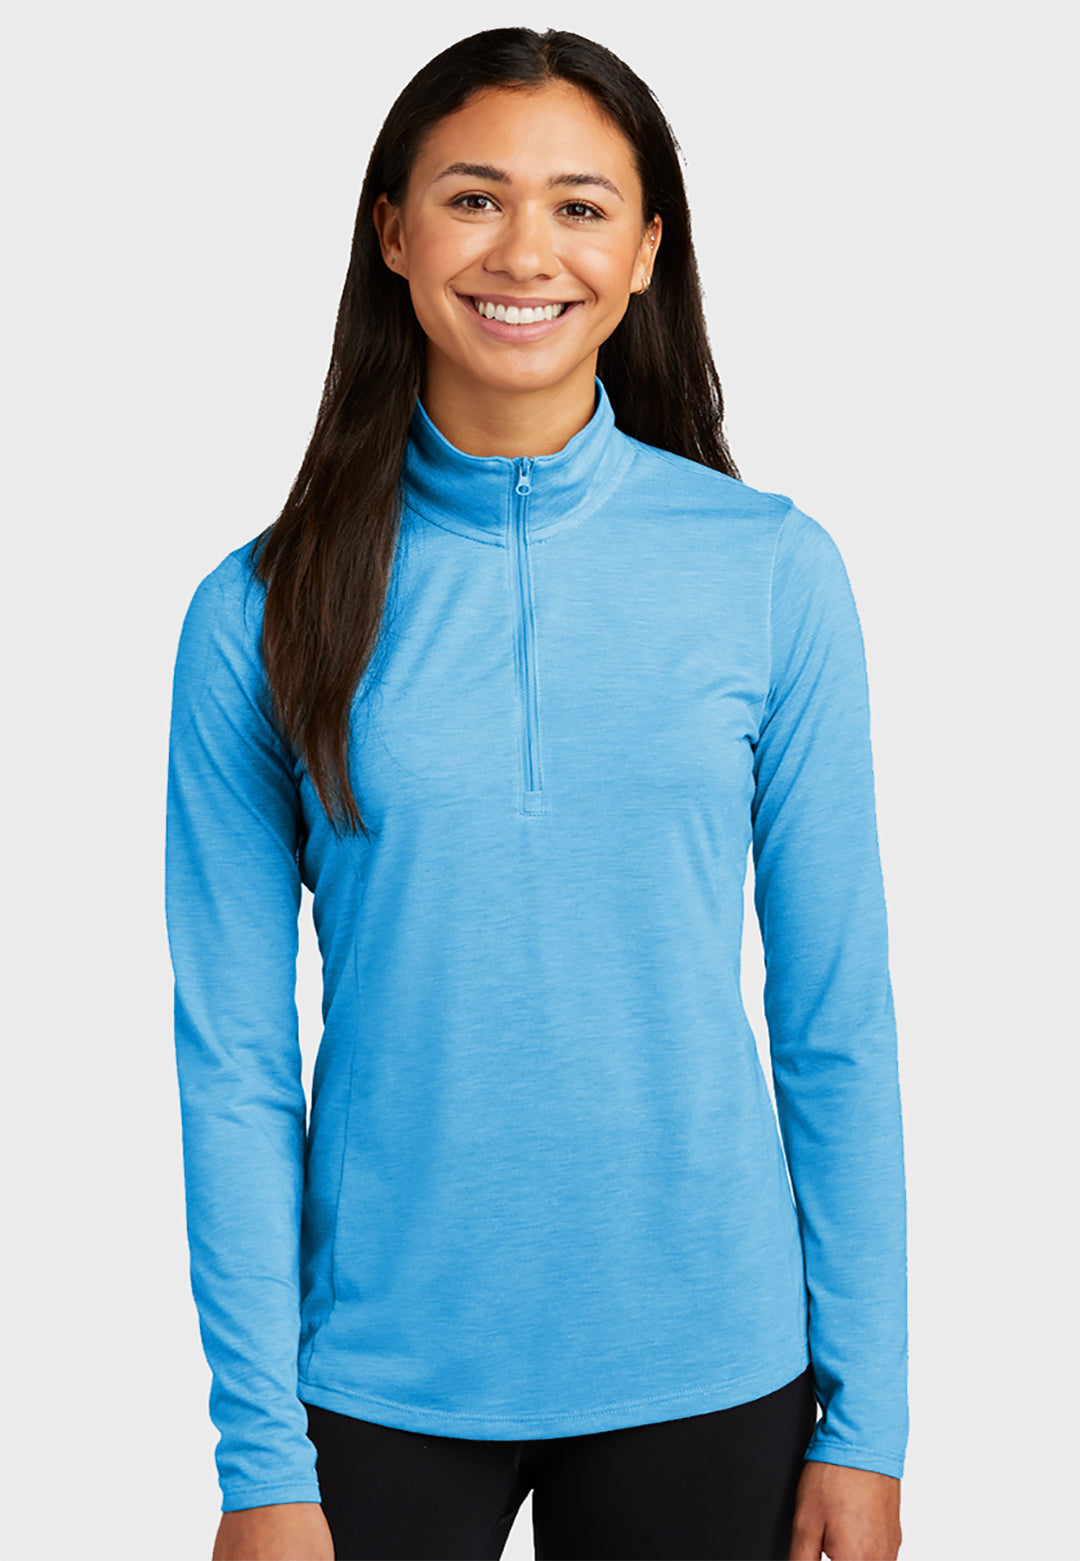 Silver Lining Stables Sport-Tek ® Ladies PosiCharge ® Tri-Blend Wicking 1/4-Zip Pullover - 2 Color Options